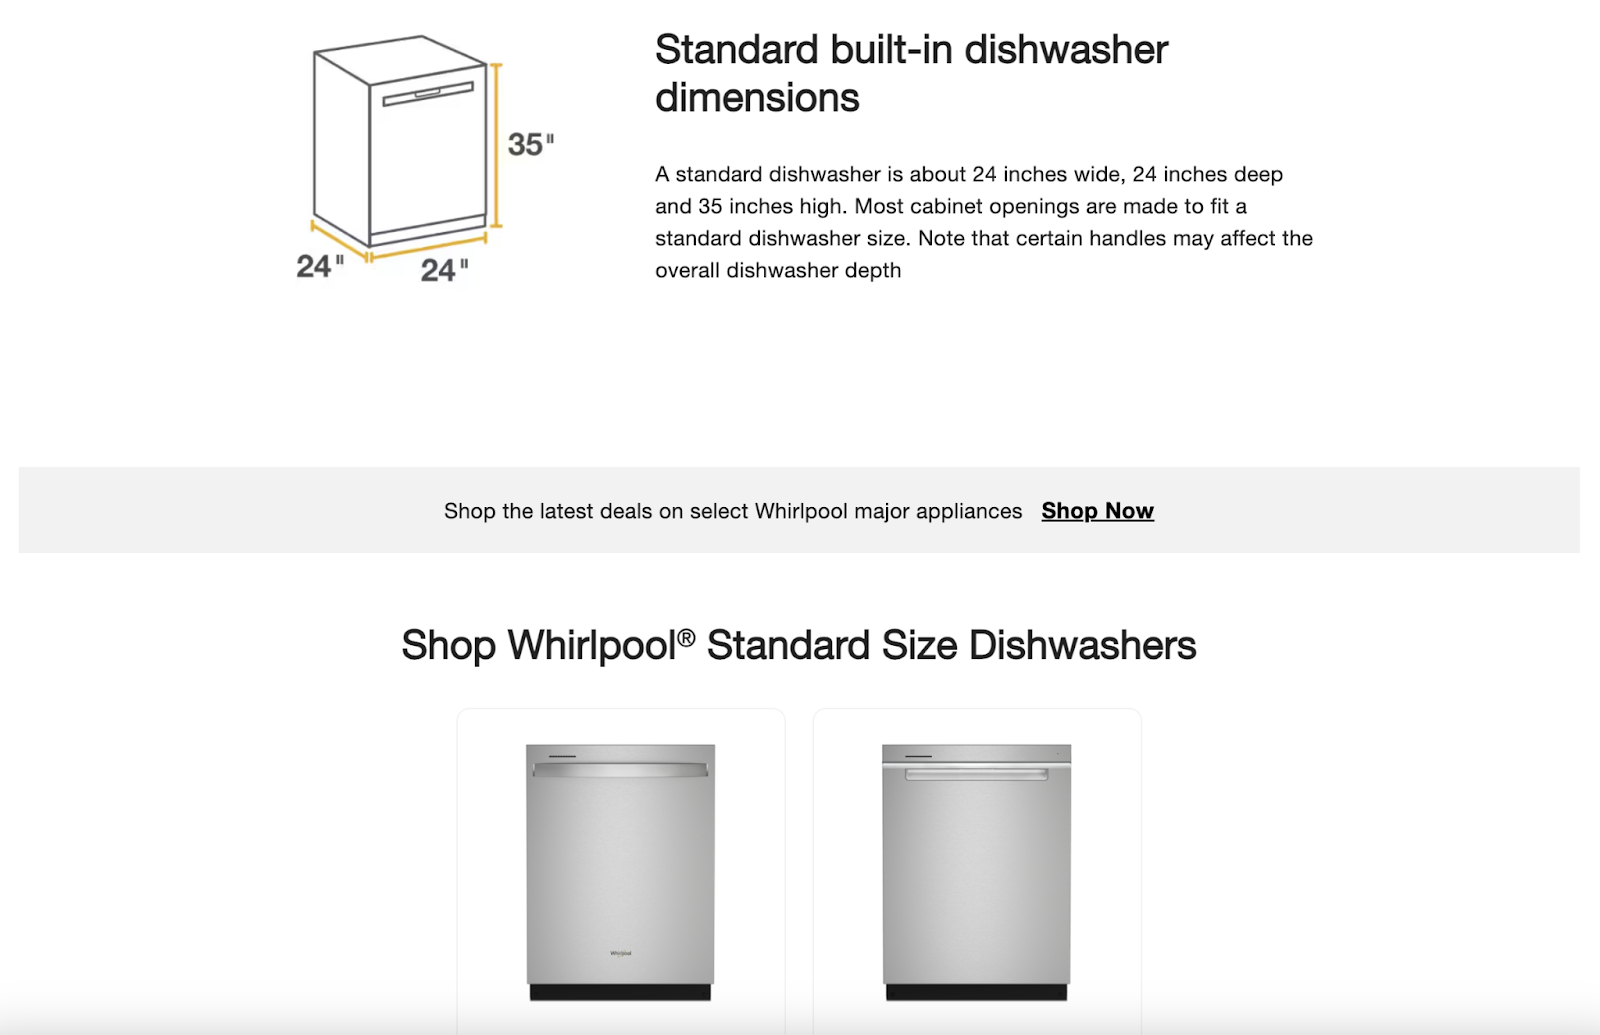 Whirlpool webpage with modular  built-in dishwasher dimensions and buying  section